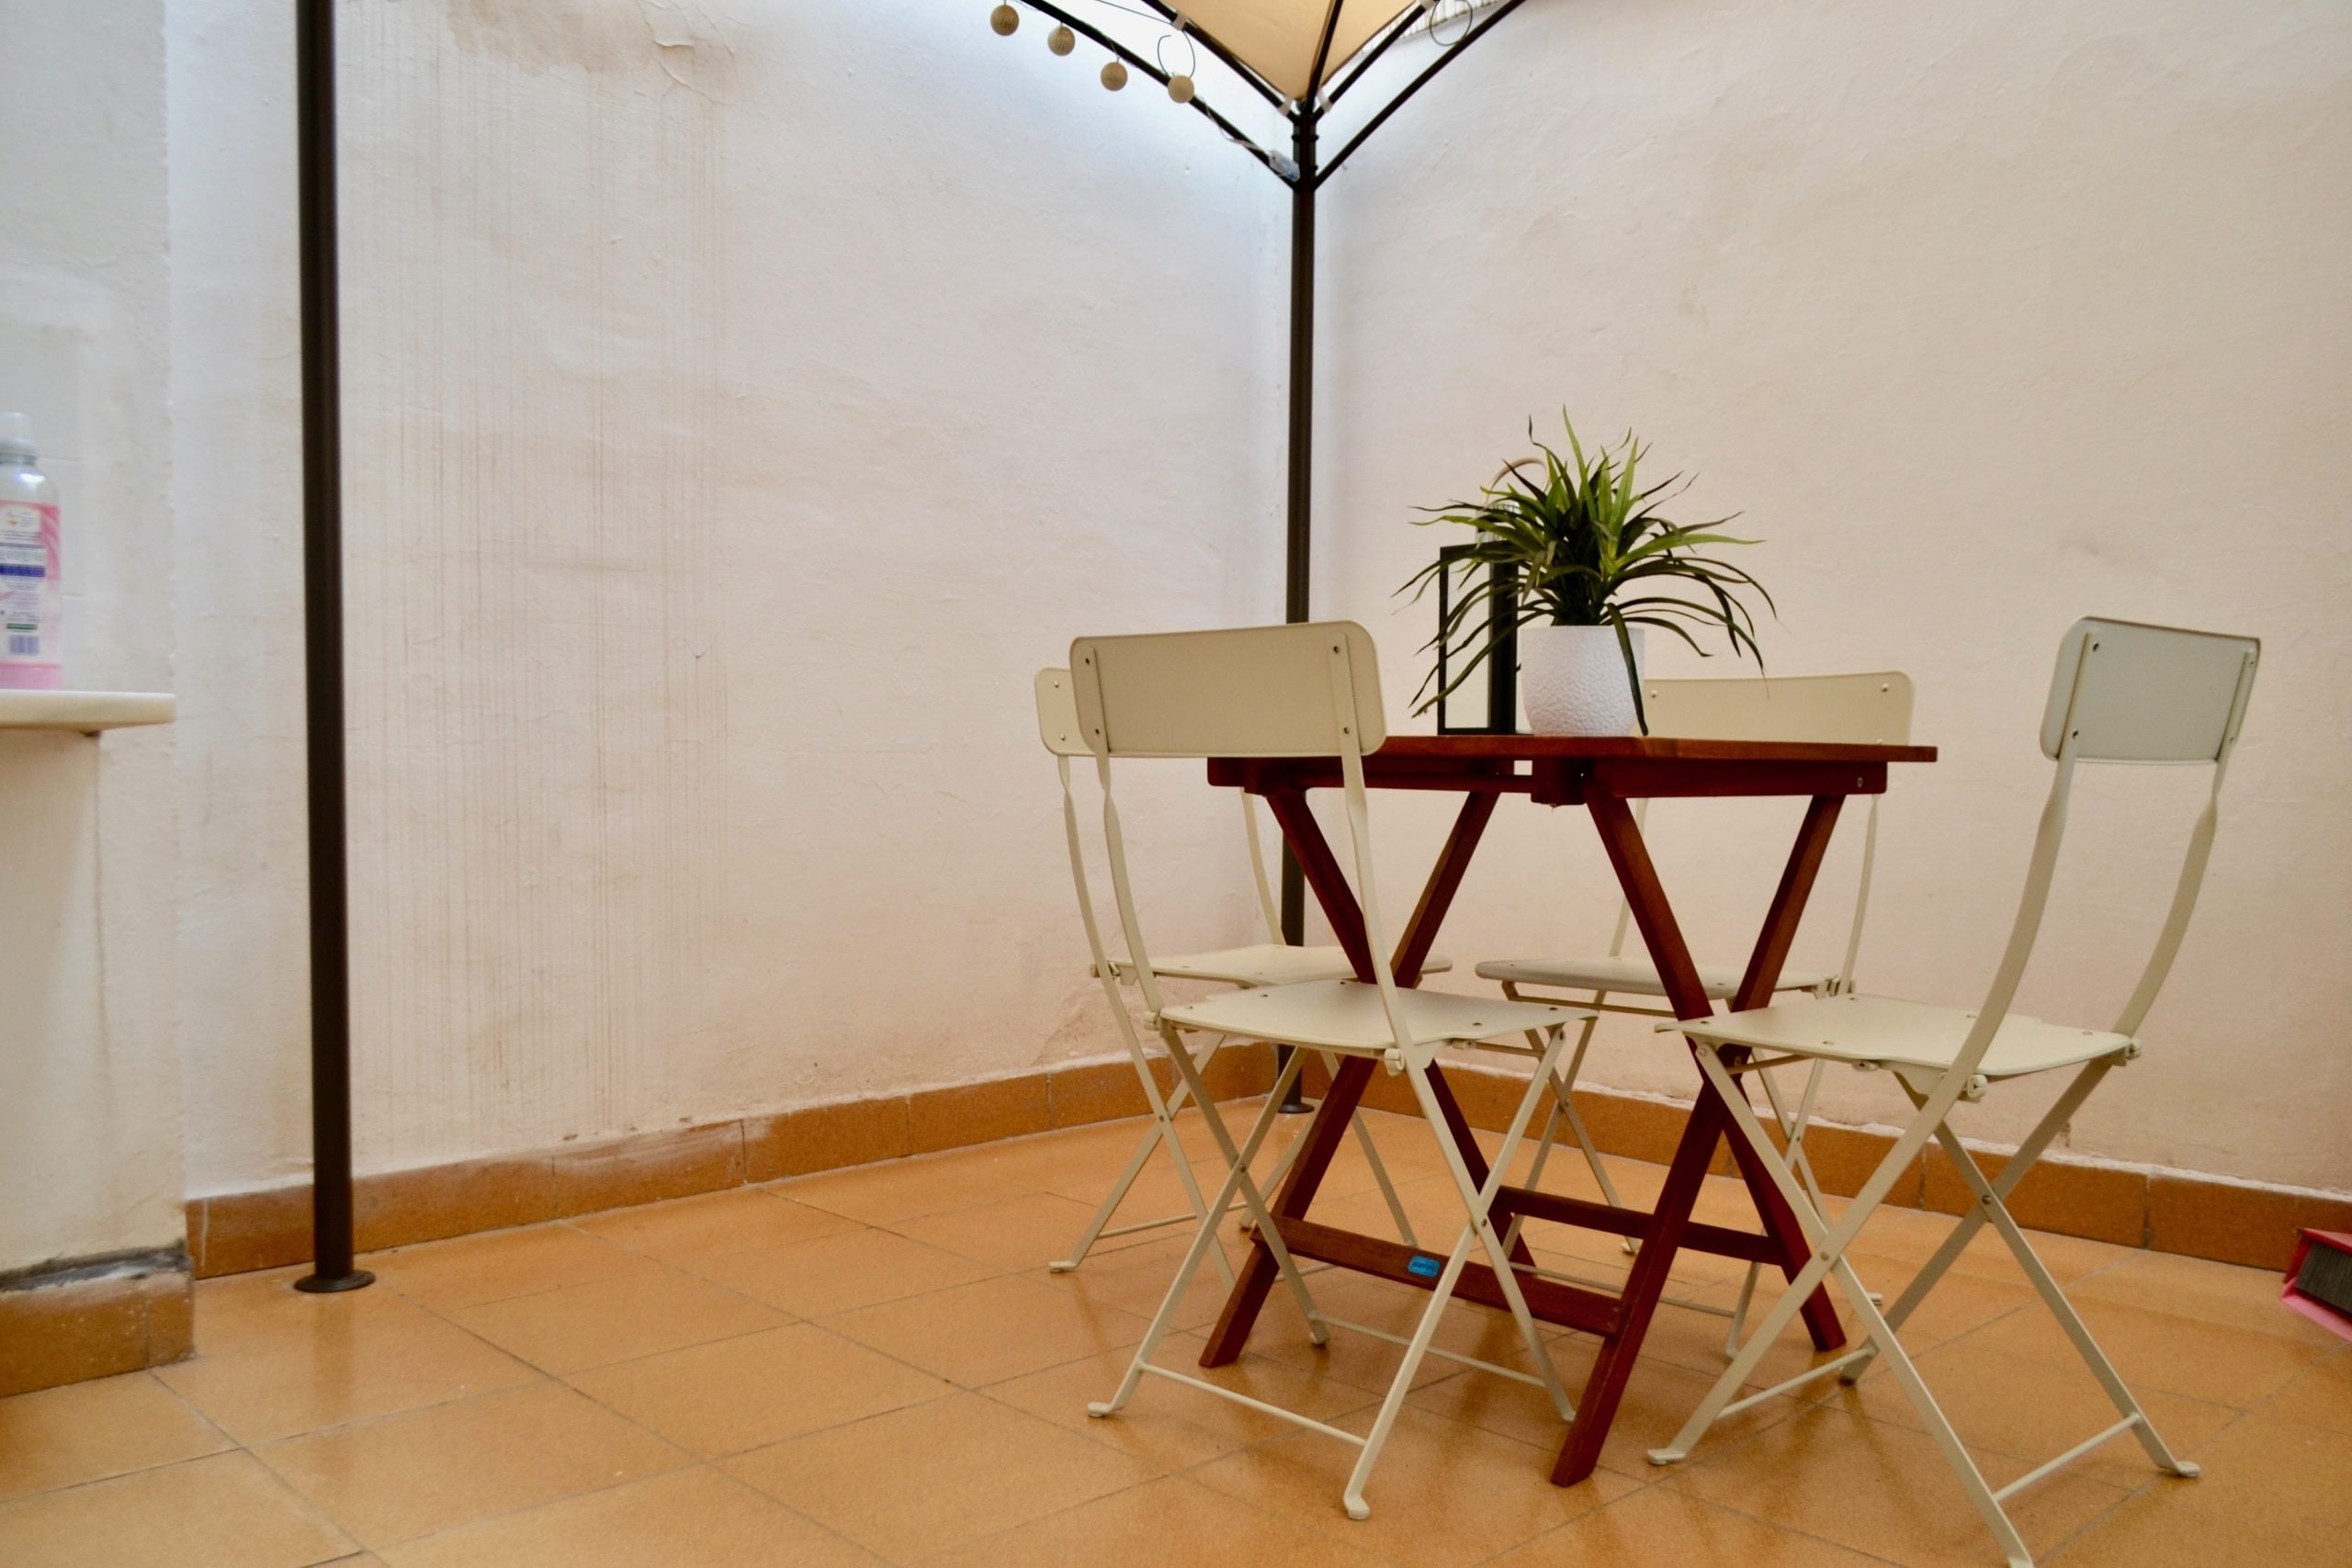 Reina 60 - Accommodation for expats in Valencia